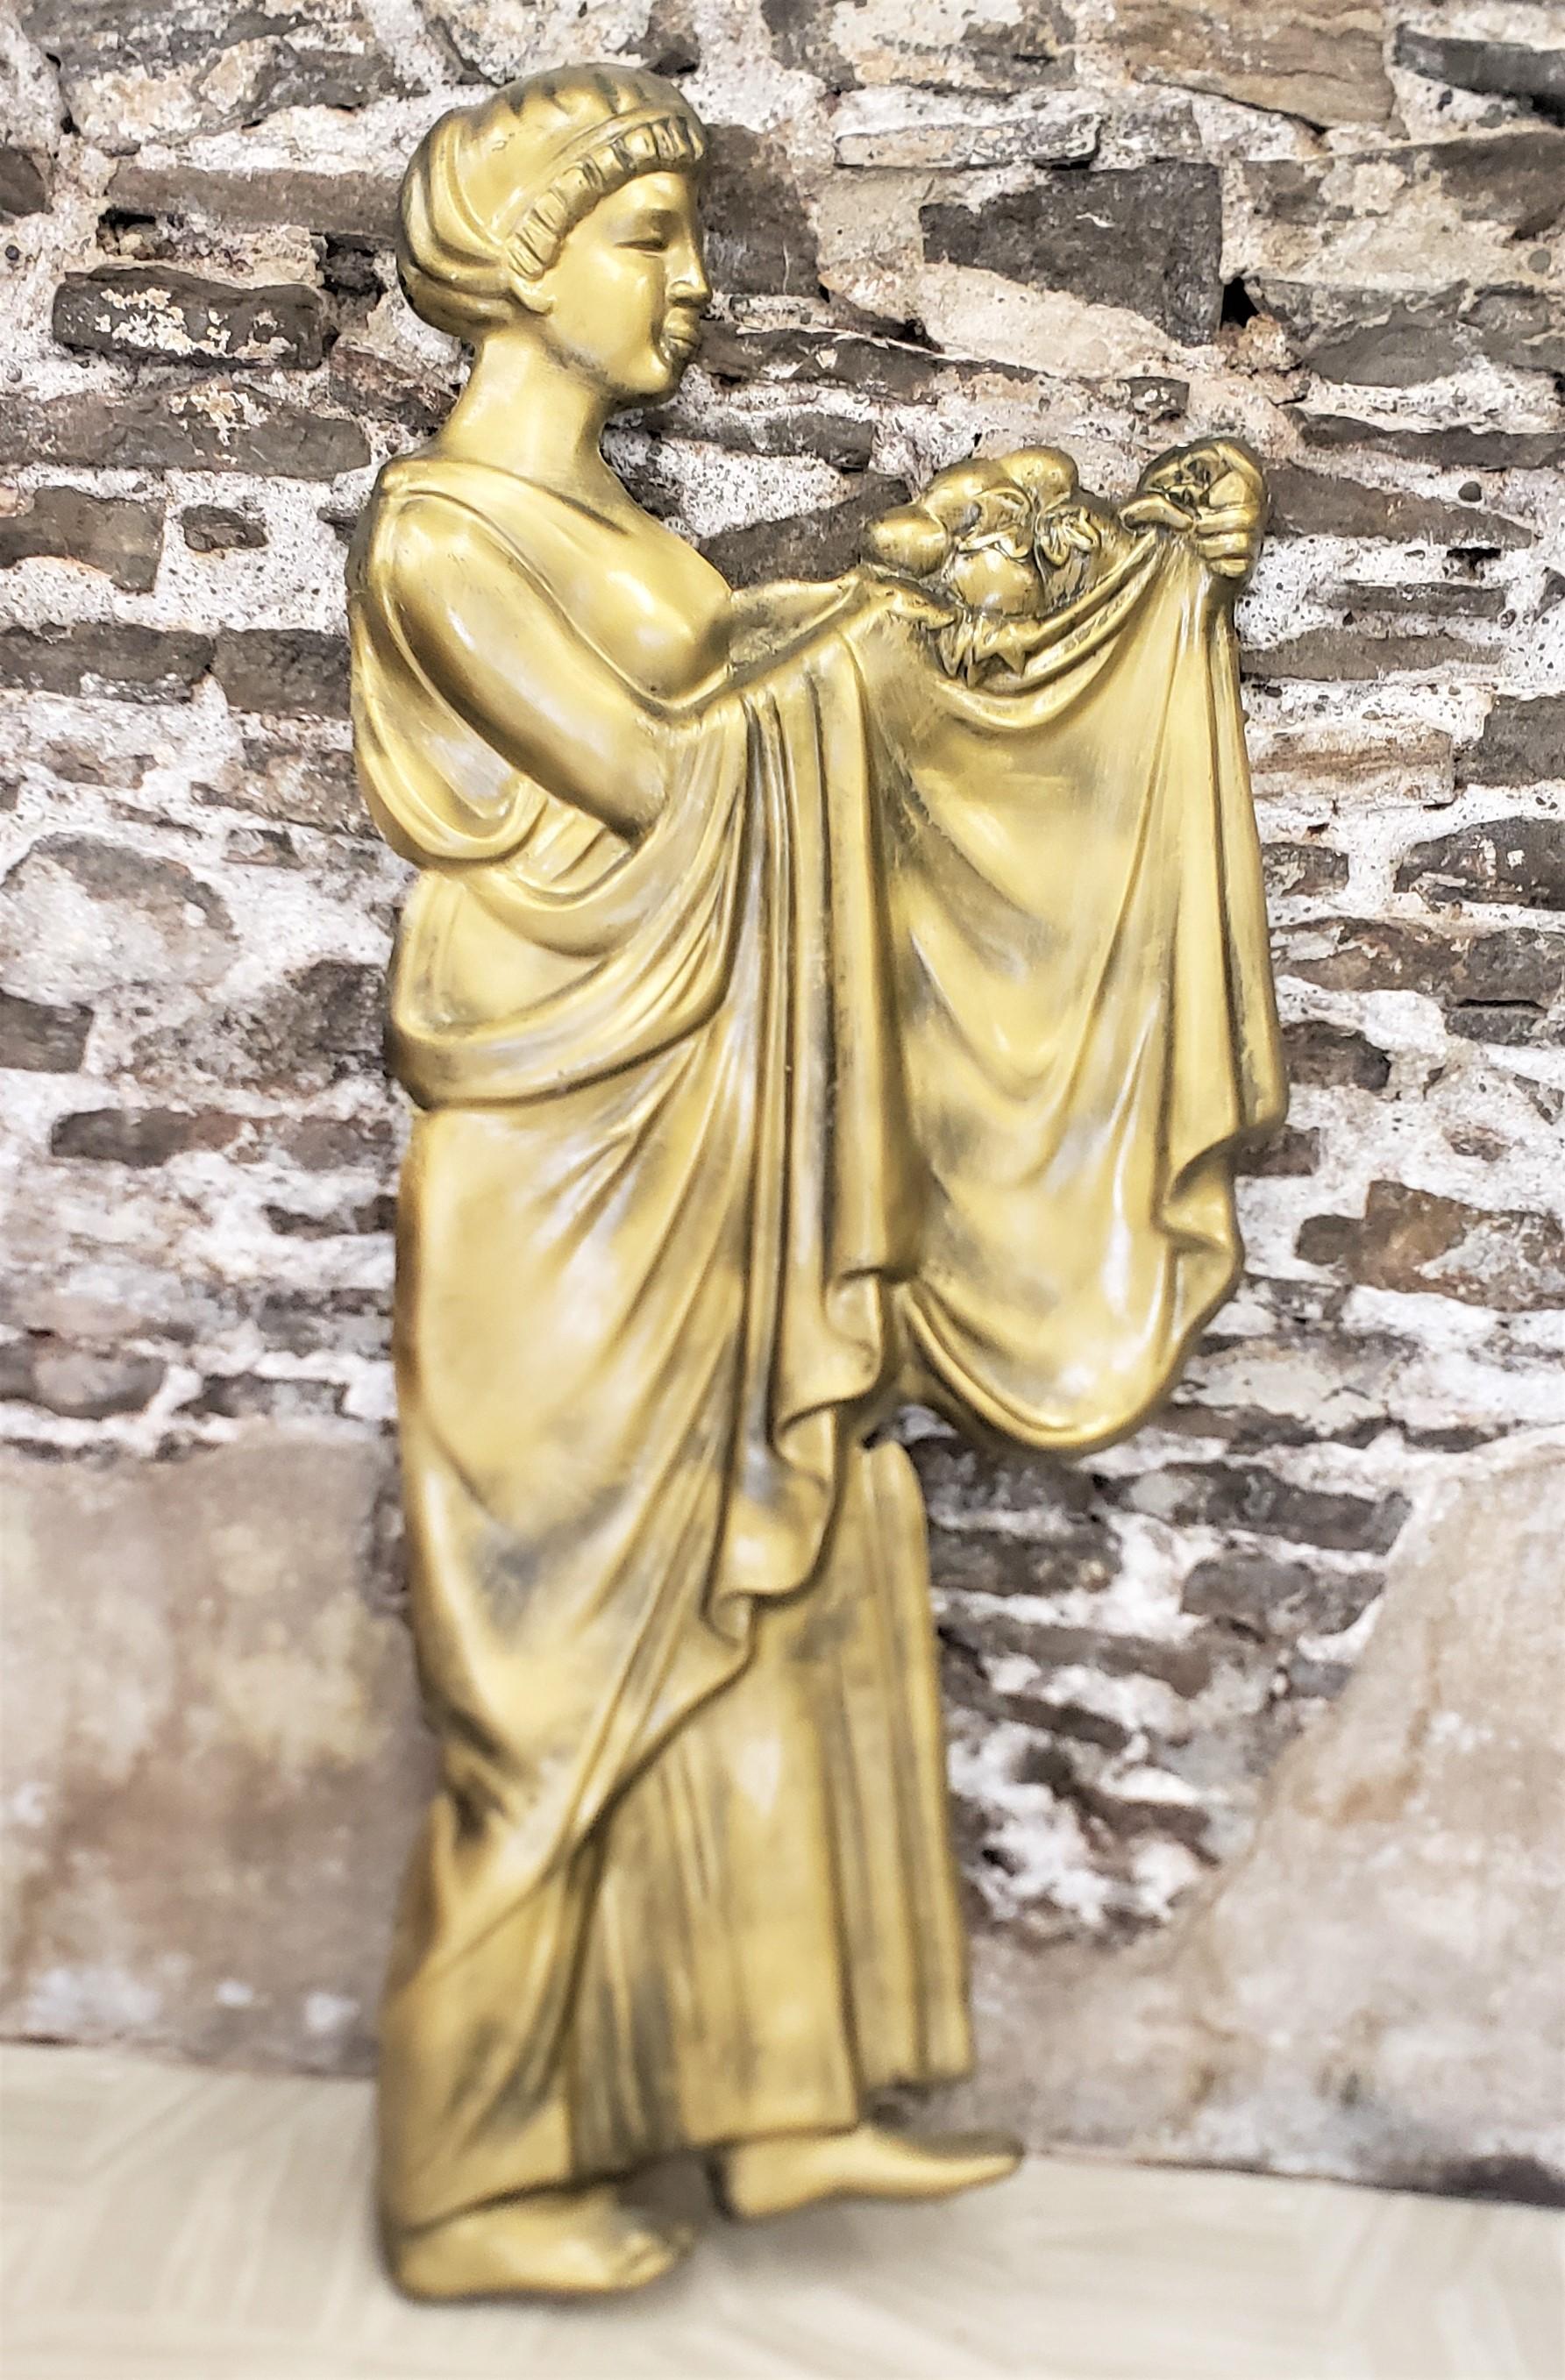 This mid-century era molded fiberglass wall sculpture is unsigned, but presumed to have been made in Canada in approximately 1960 in a Neoclassical Revival style. The relief depicts a seminude young female with long flowing robes, carrying a bowl or